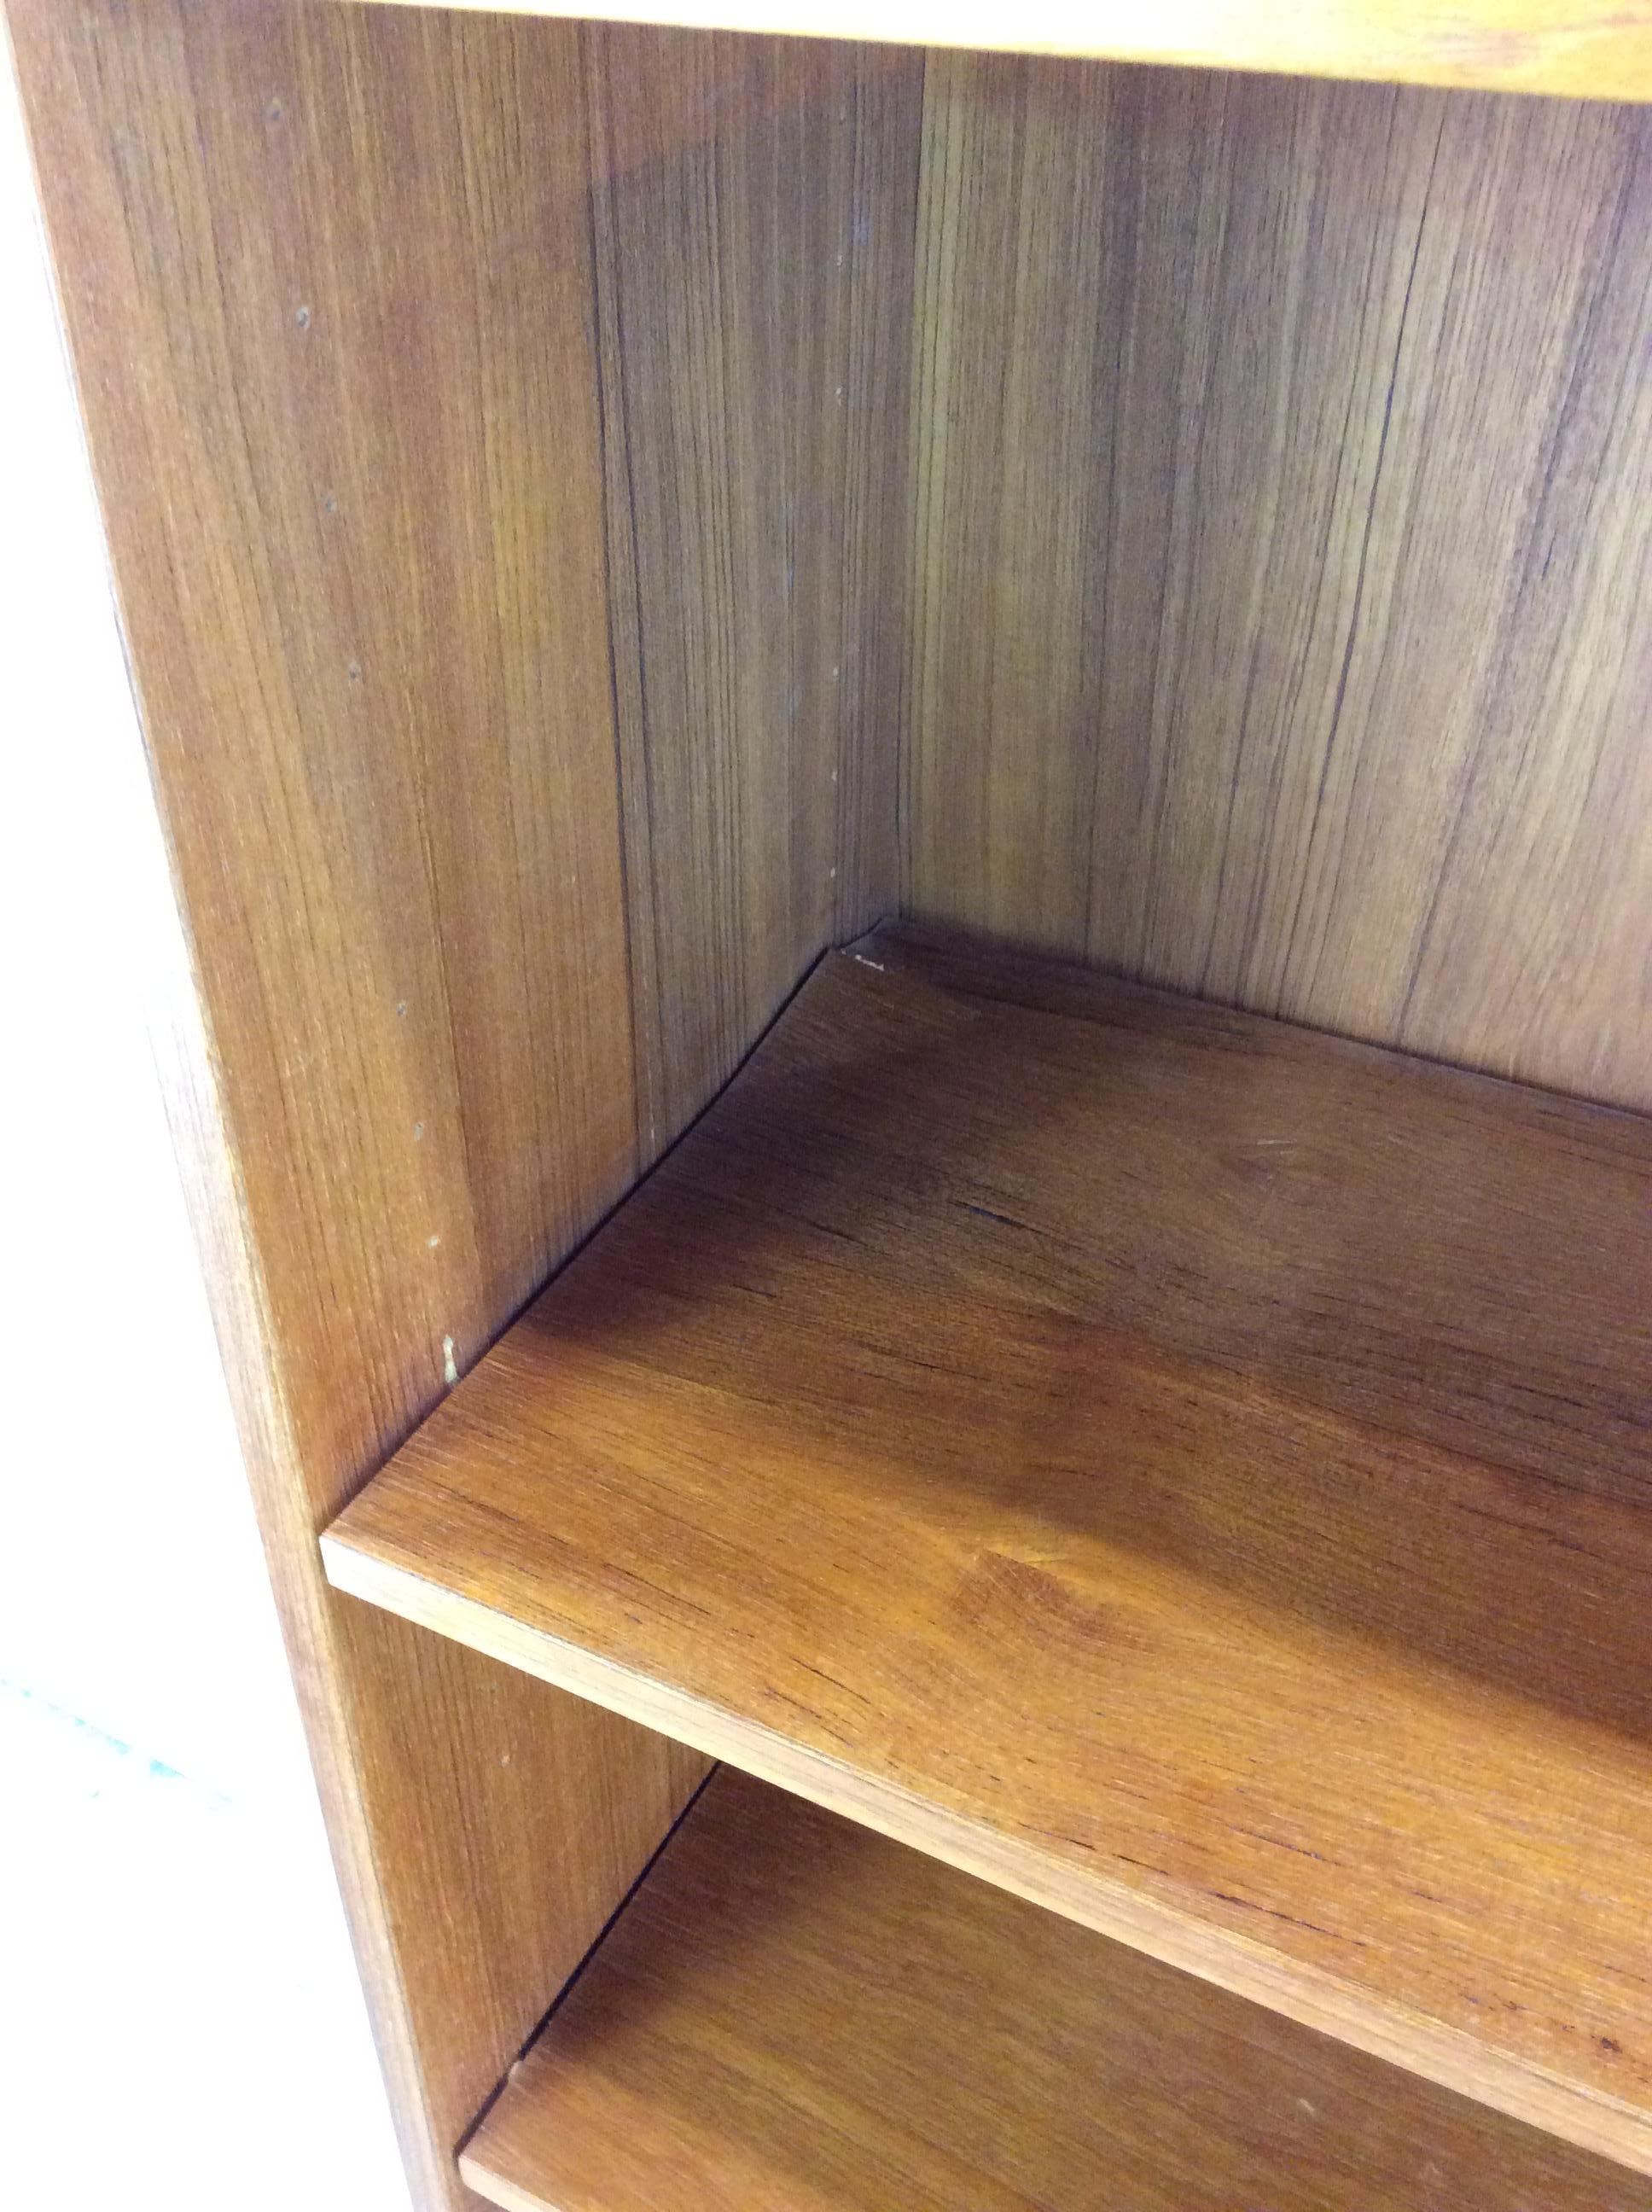 Danish Modern Tall Teak Bookcase In Good Condition For Sale In Freehold, NJ